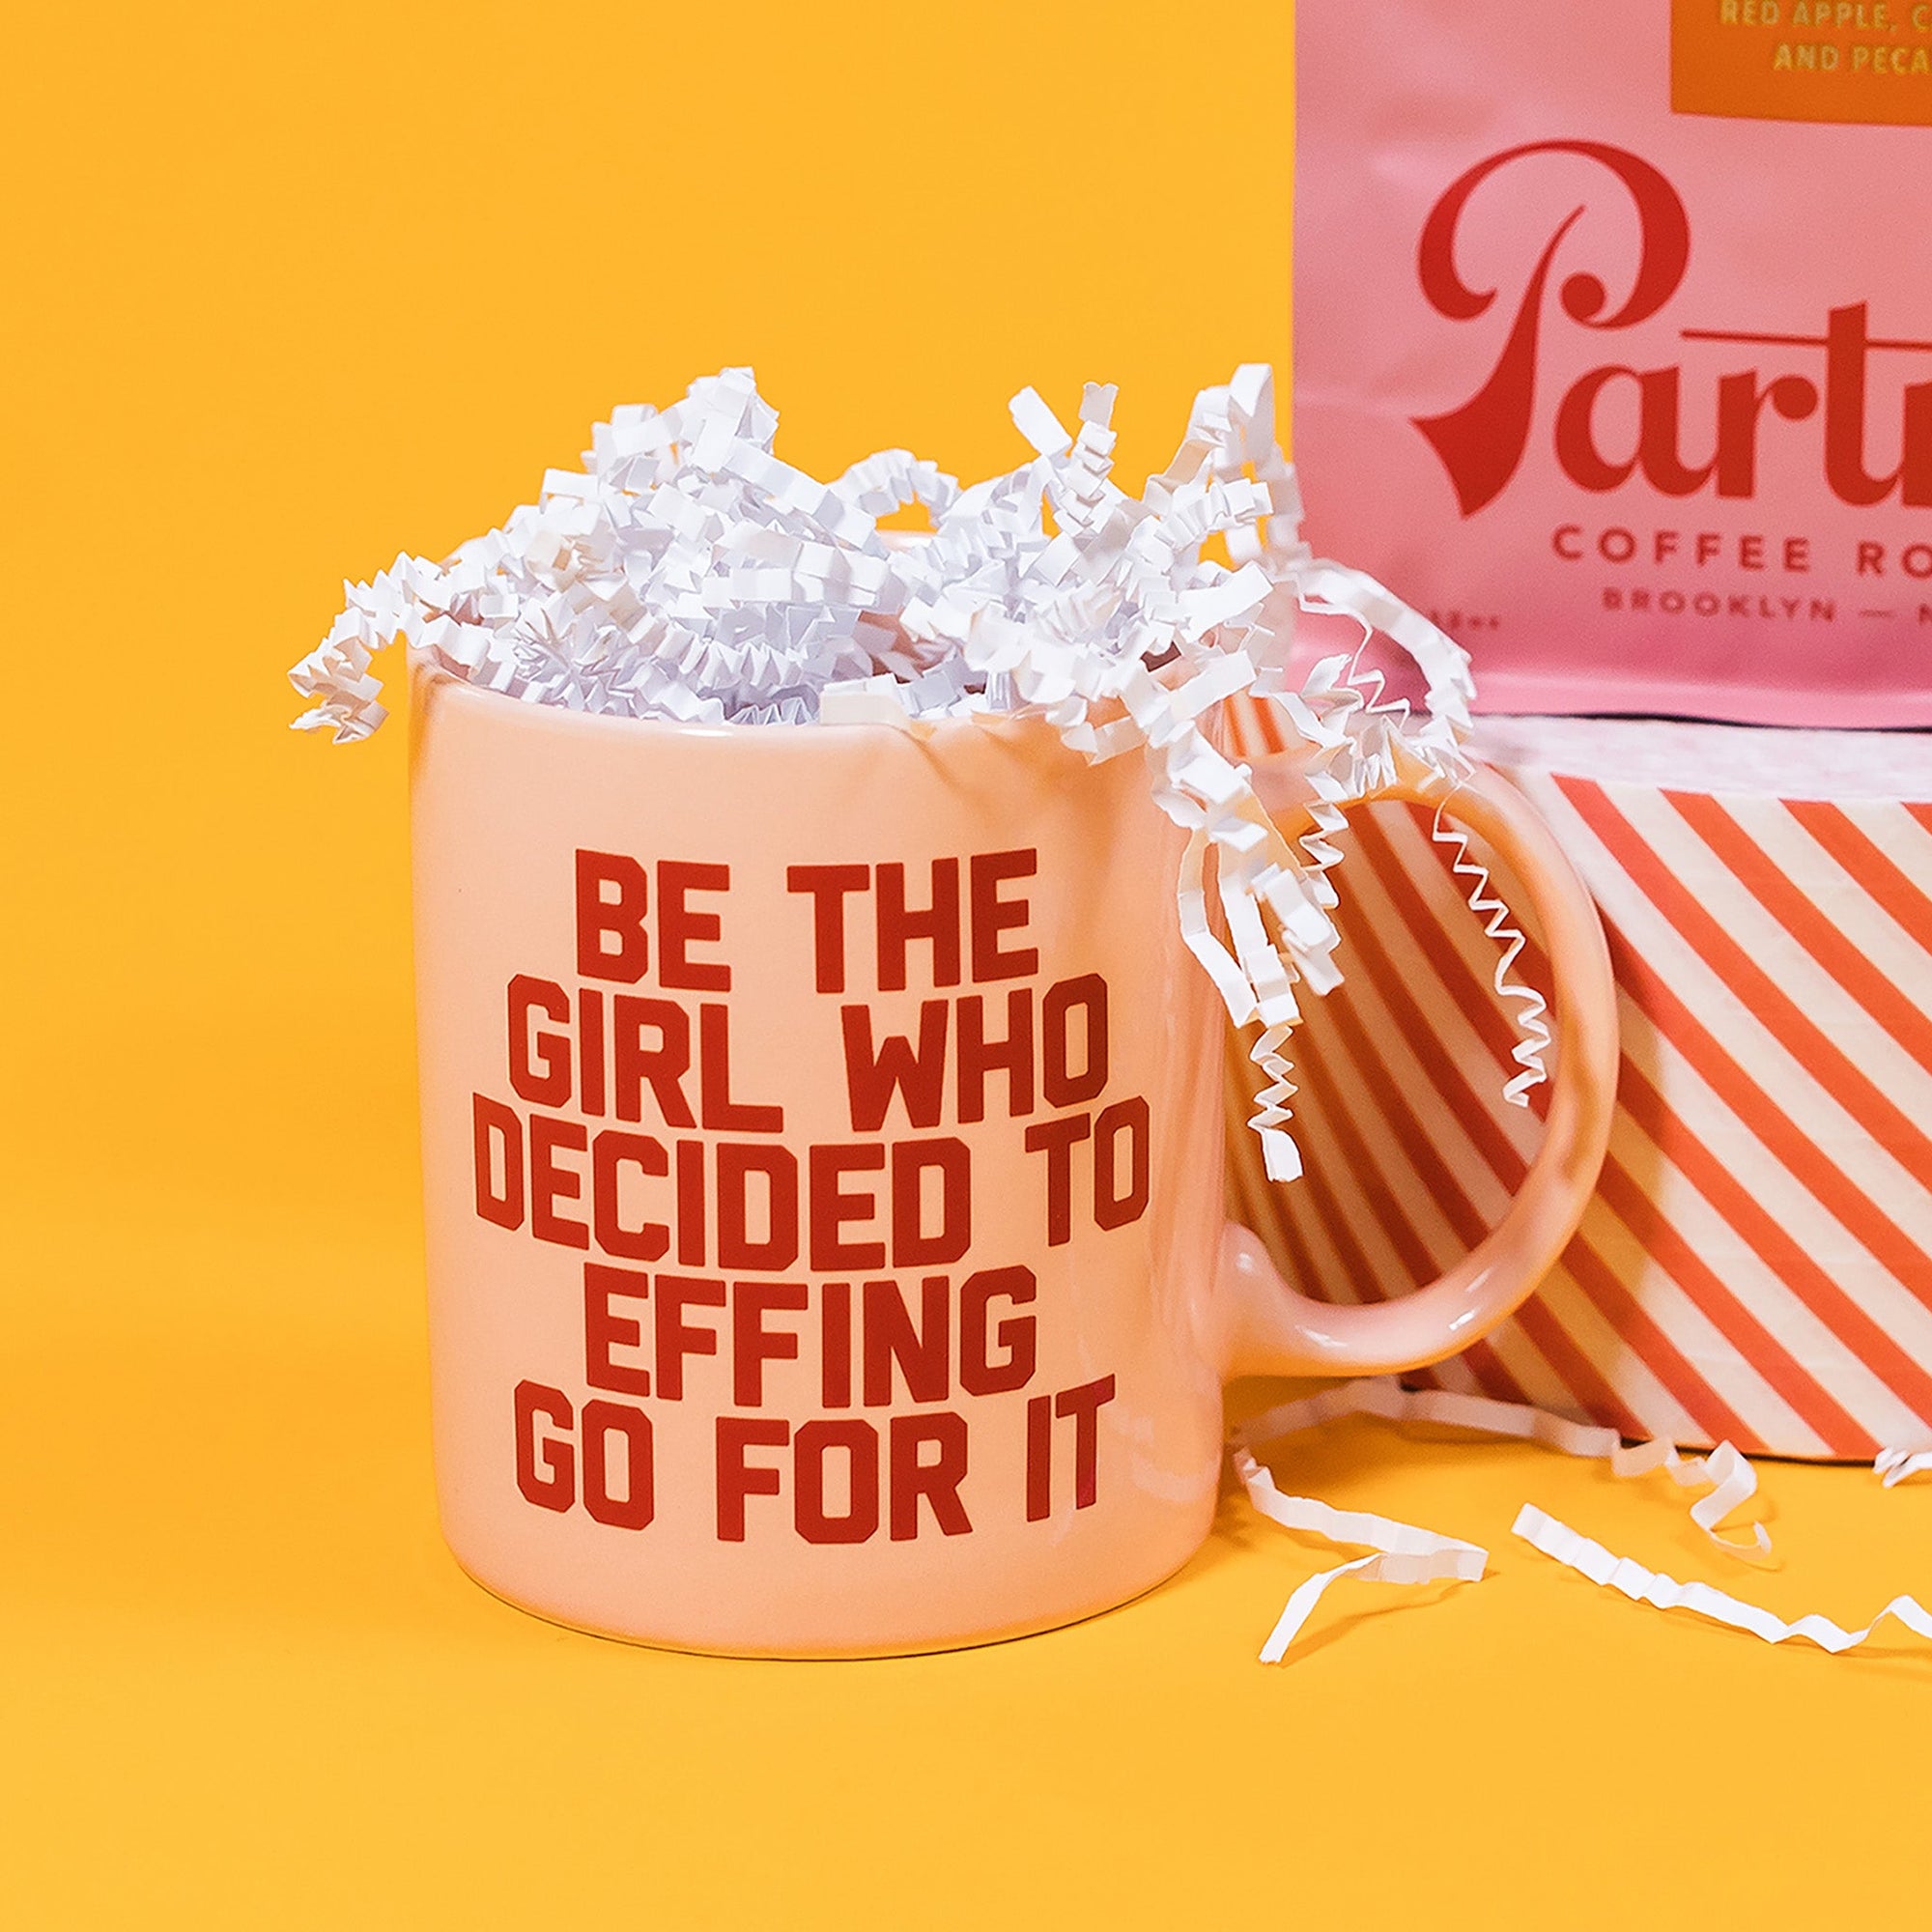 On a sunny mustard background sits a mug with white crinkle in it. The light pink mug says "BE THE GIRL WHO DECIDED TO EFFING GO FOR IT" in red, all caps block font.